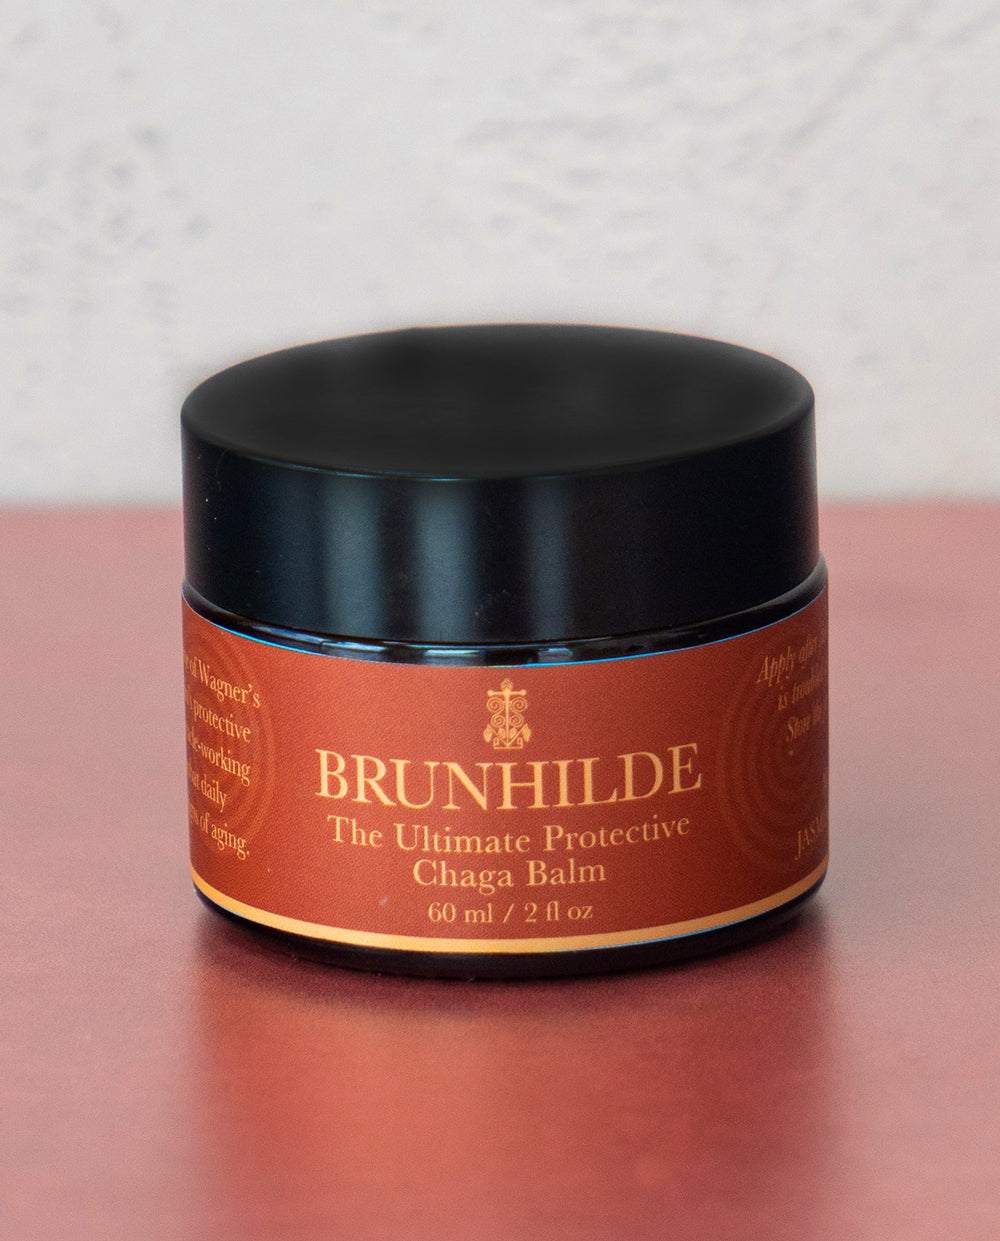 Brunhilde ~ The Ultimate Protective Chaga Balm